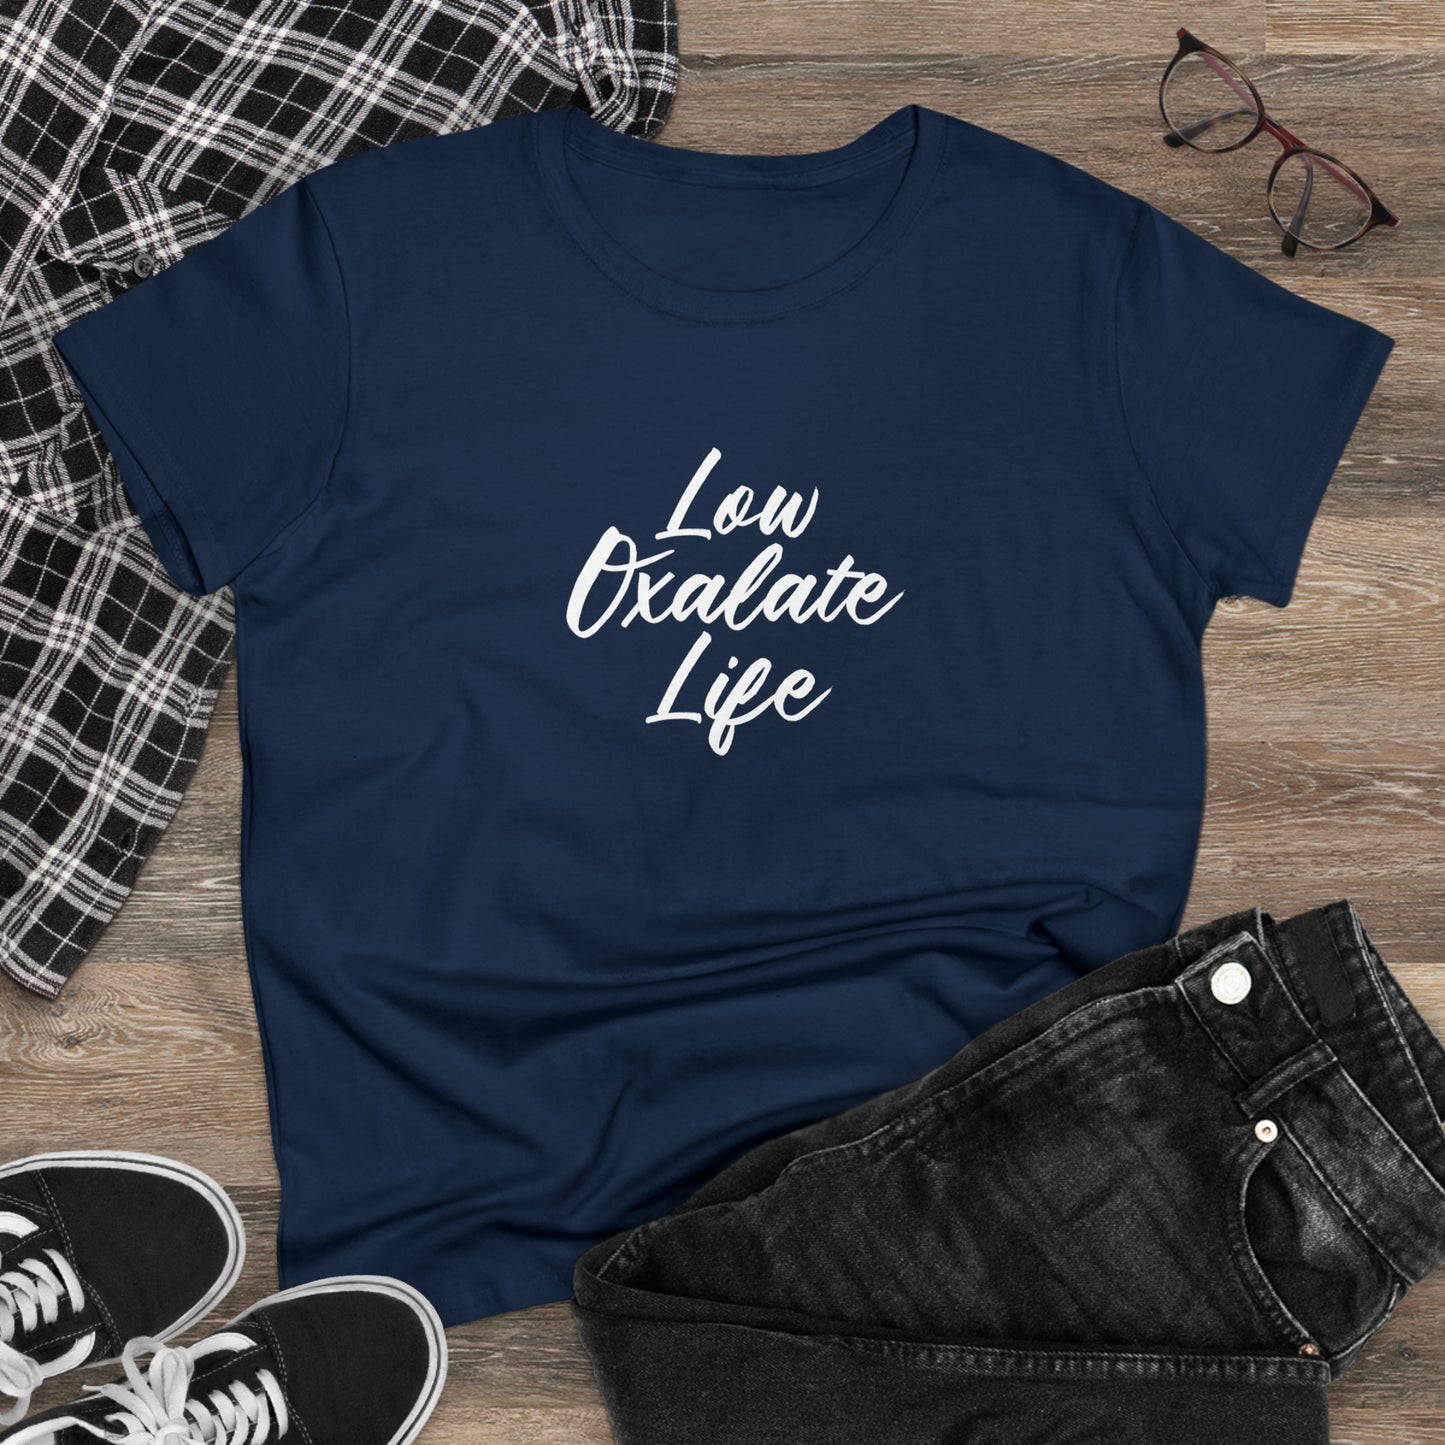 Women's Low Oxalate Life Shirt for the Health Conscious